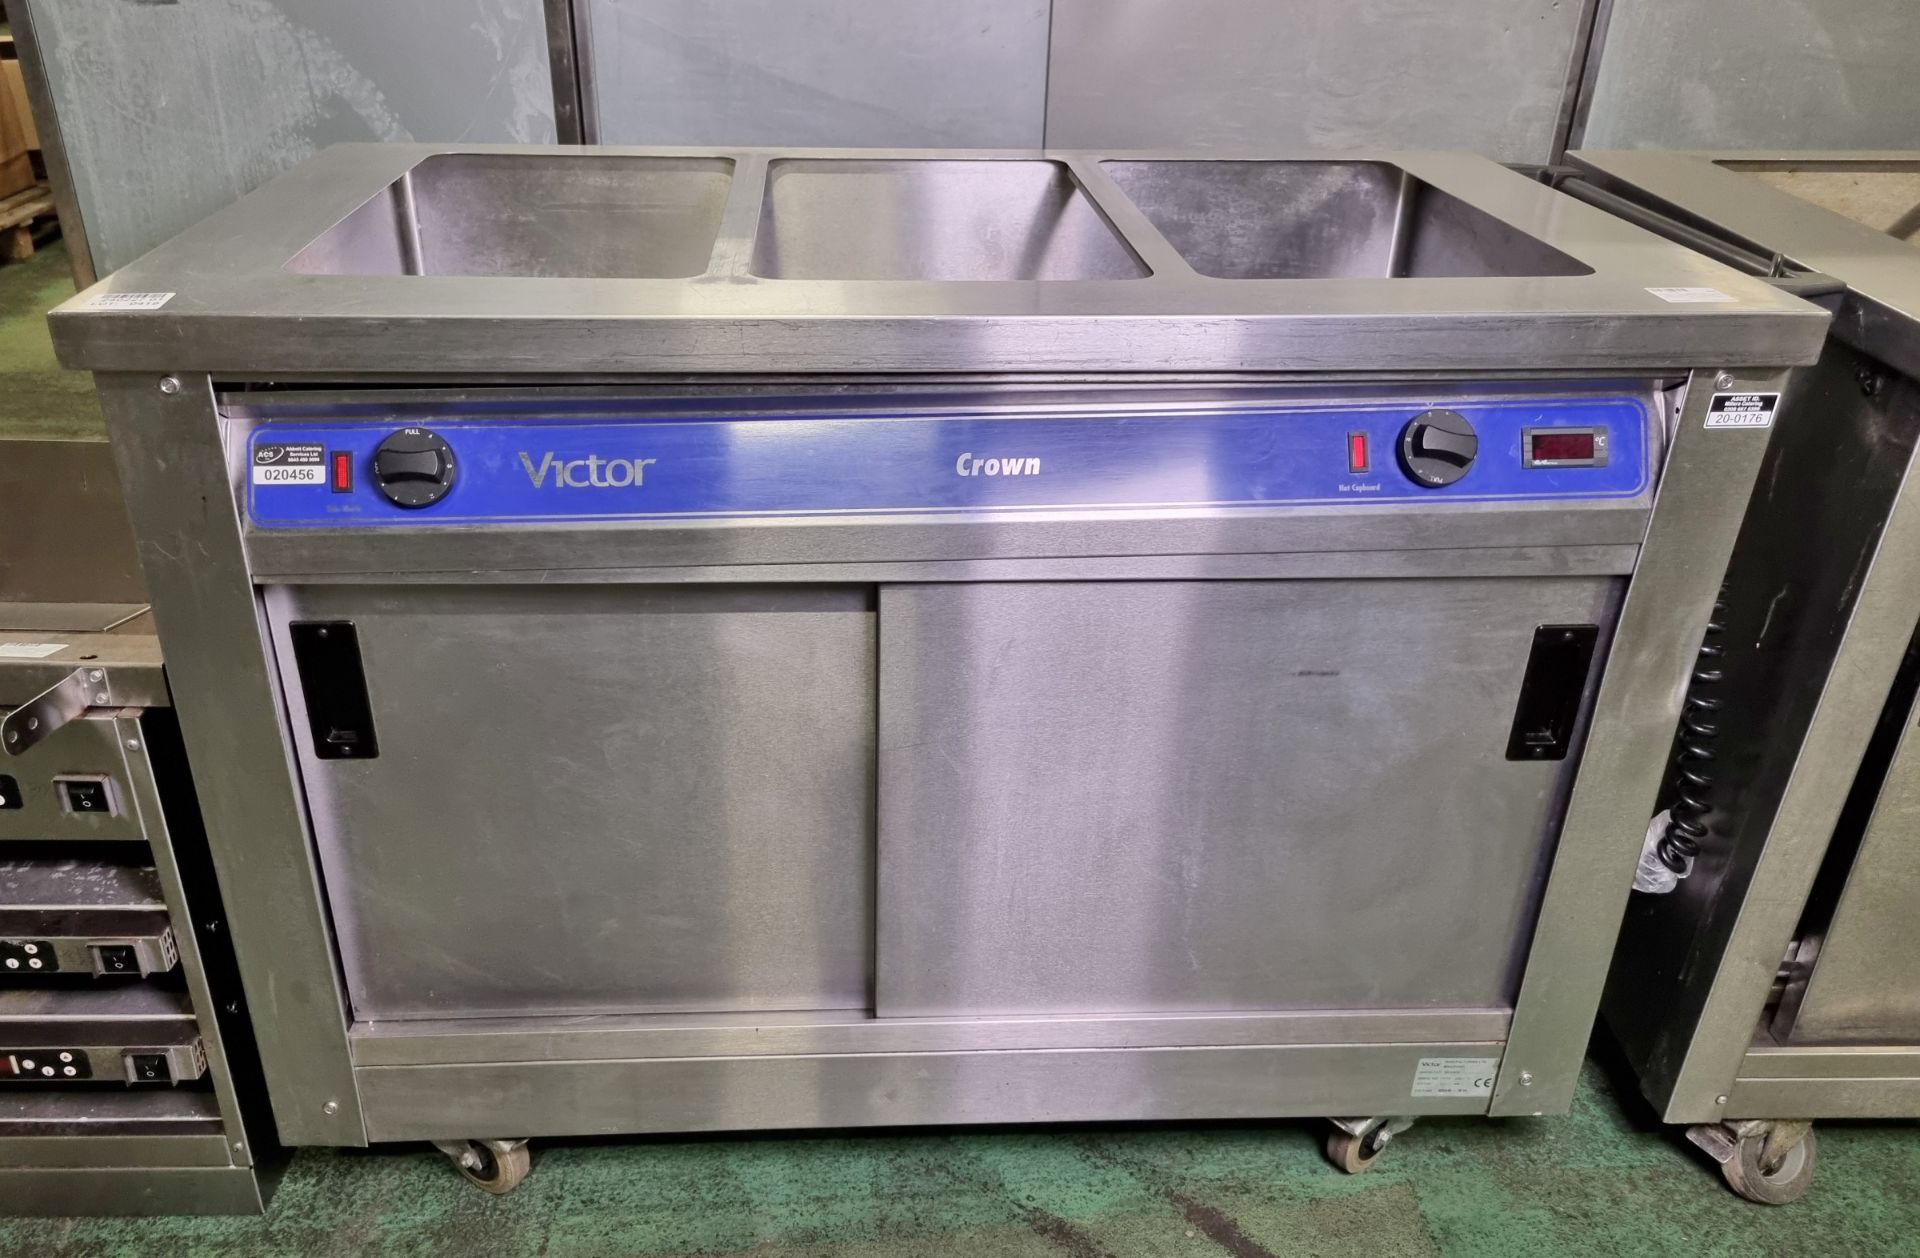 Victor Crown BM30MS mobile bain marie hot cupboard - 220/240V - missing pans - W 1300 x D 900